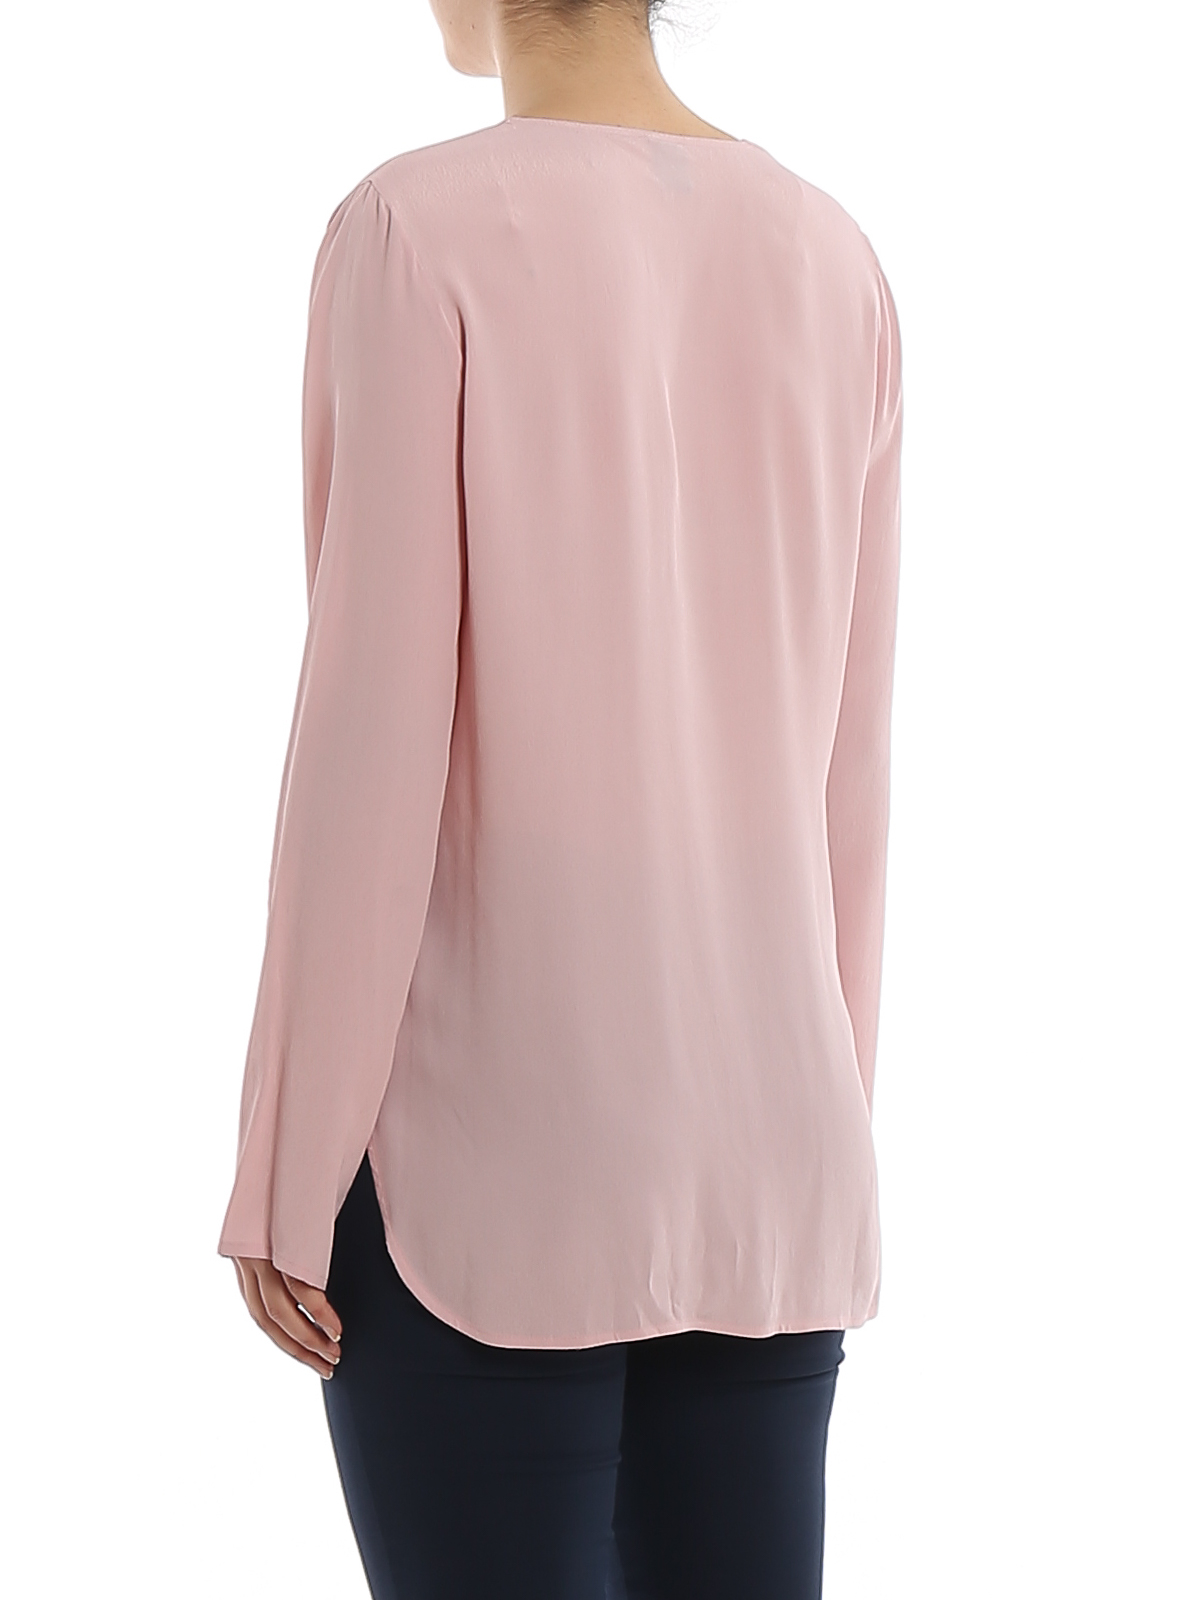 Blouses Pinko - Preludere 1 blouse - | Shop online at iKRIX